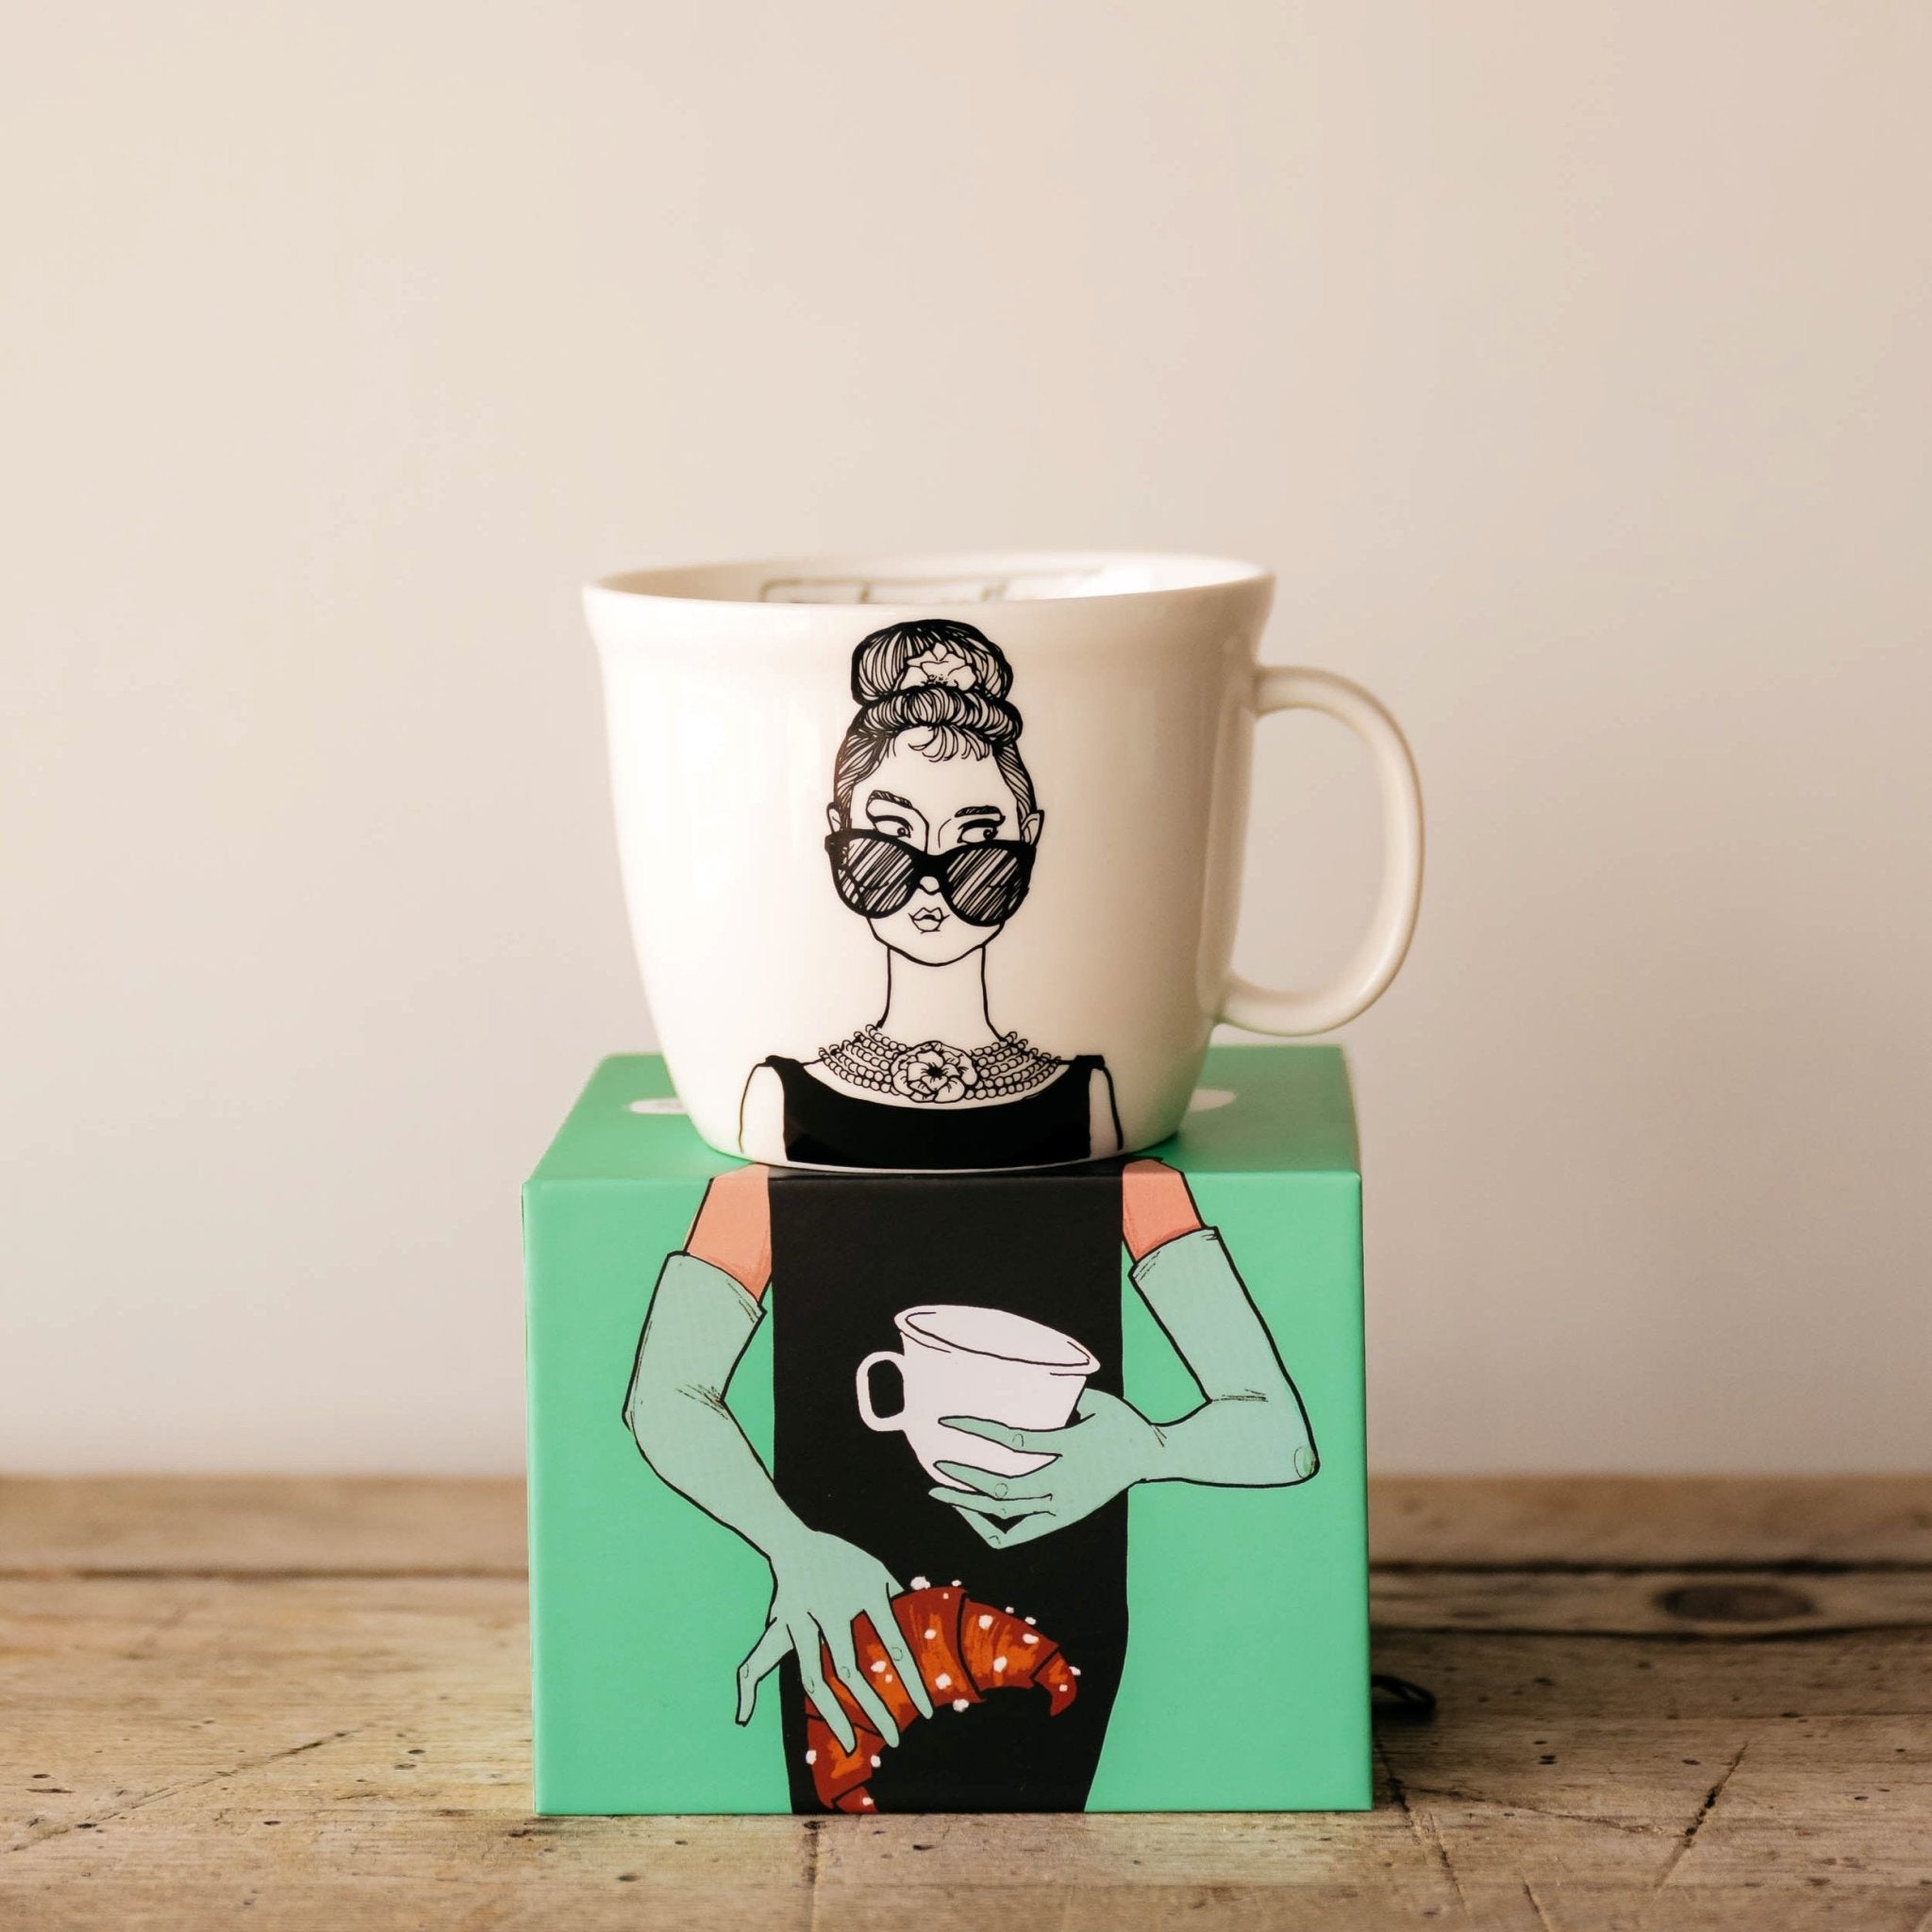 Porcelain cup inspired by Audrey Hepburn on the box